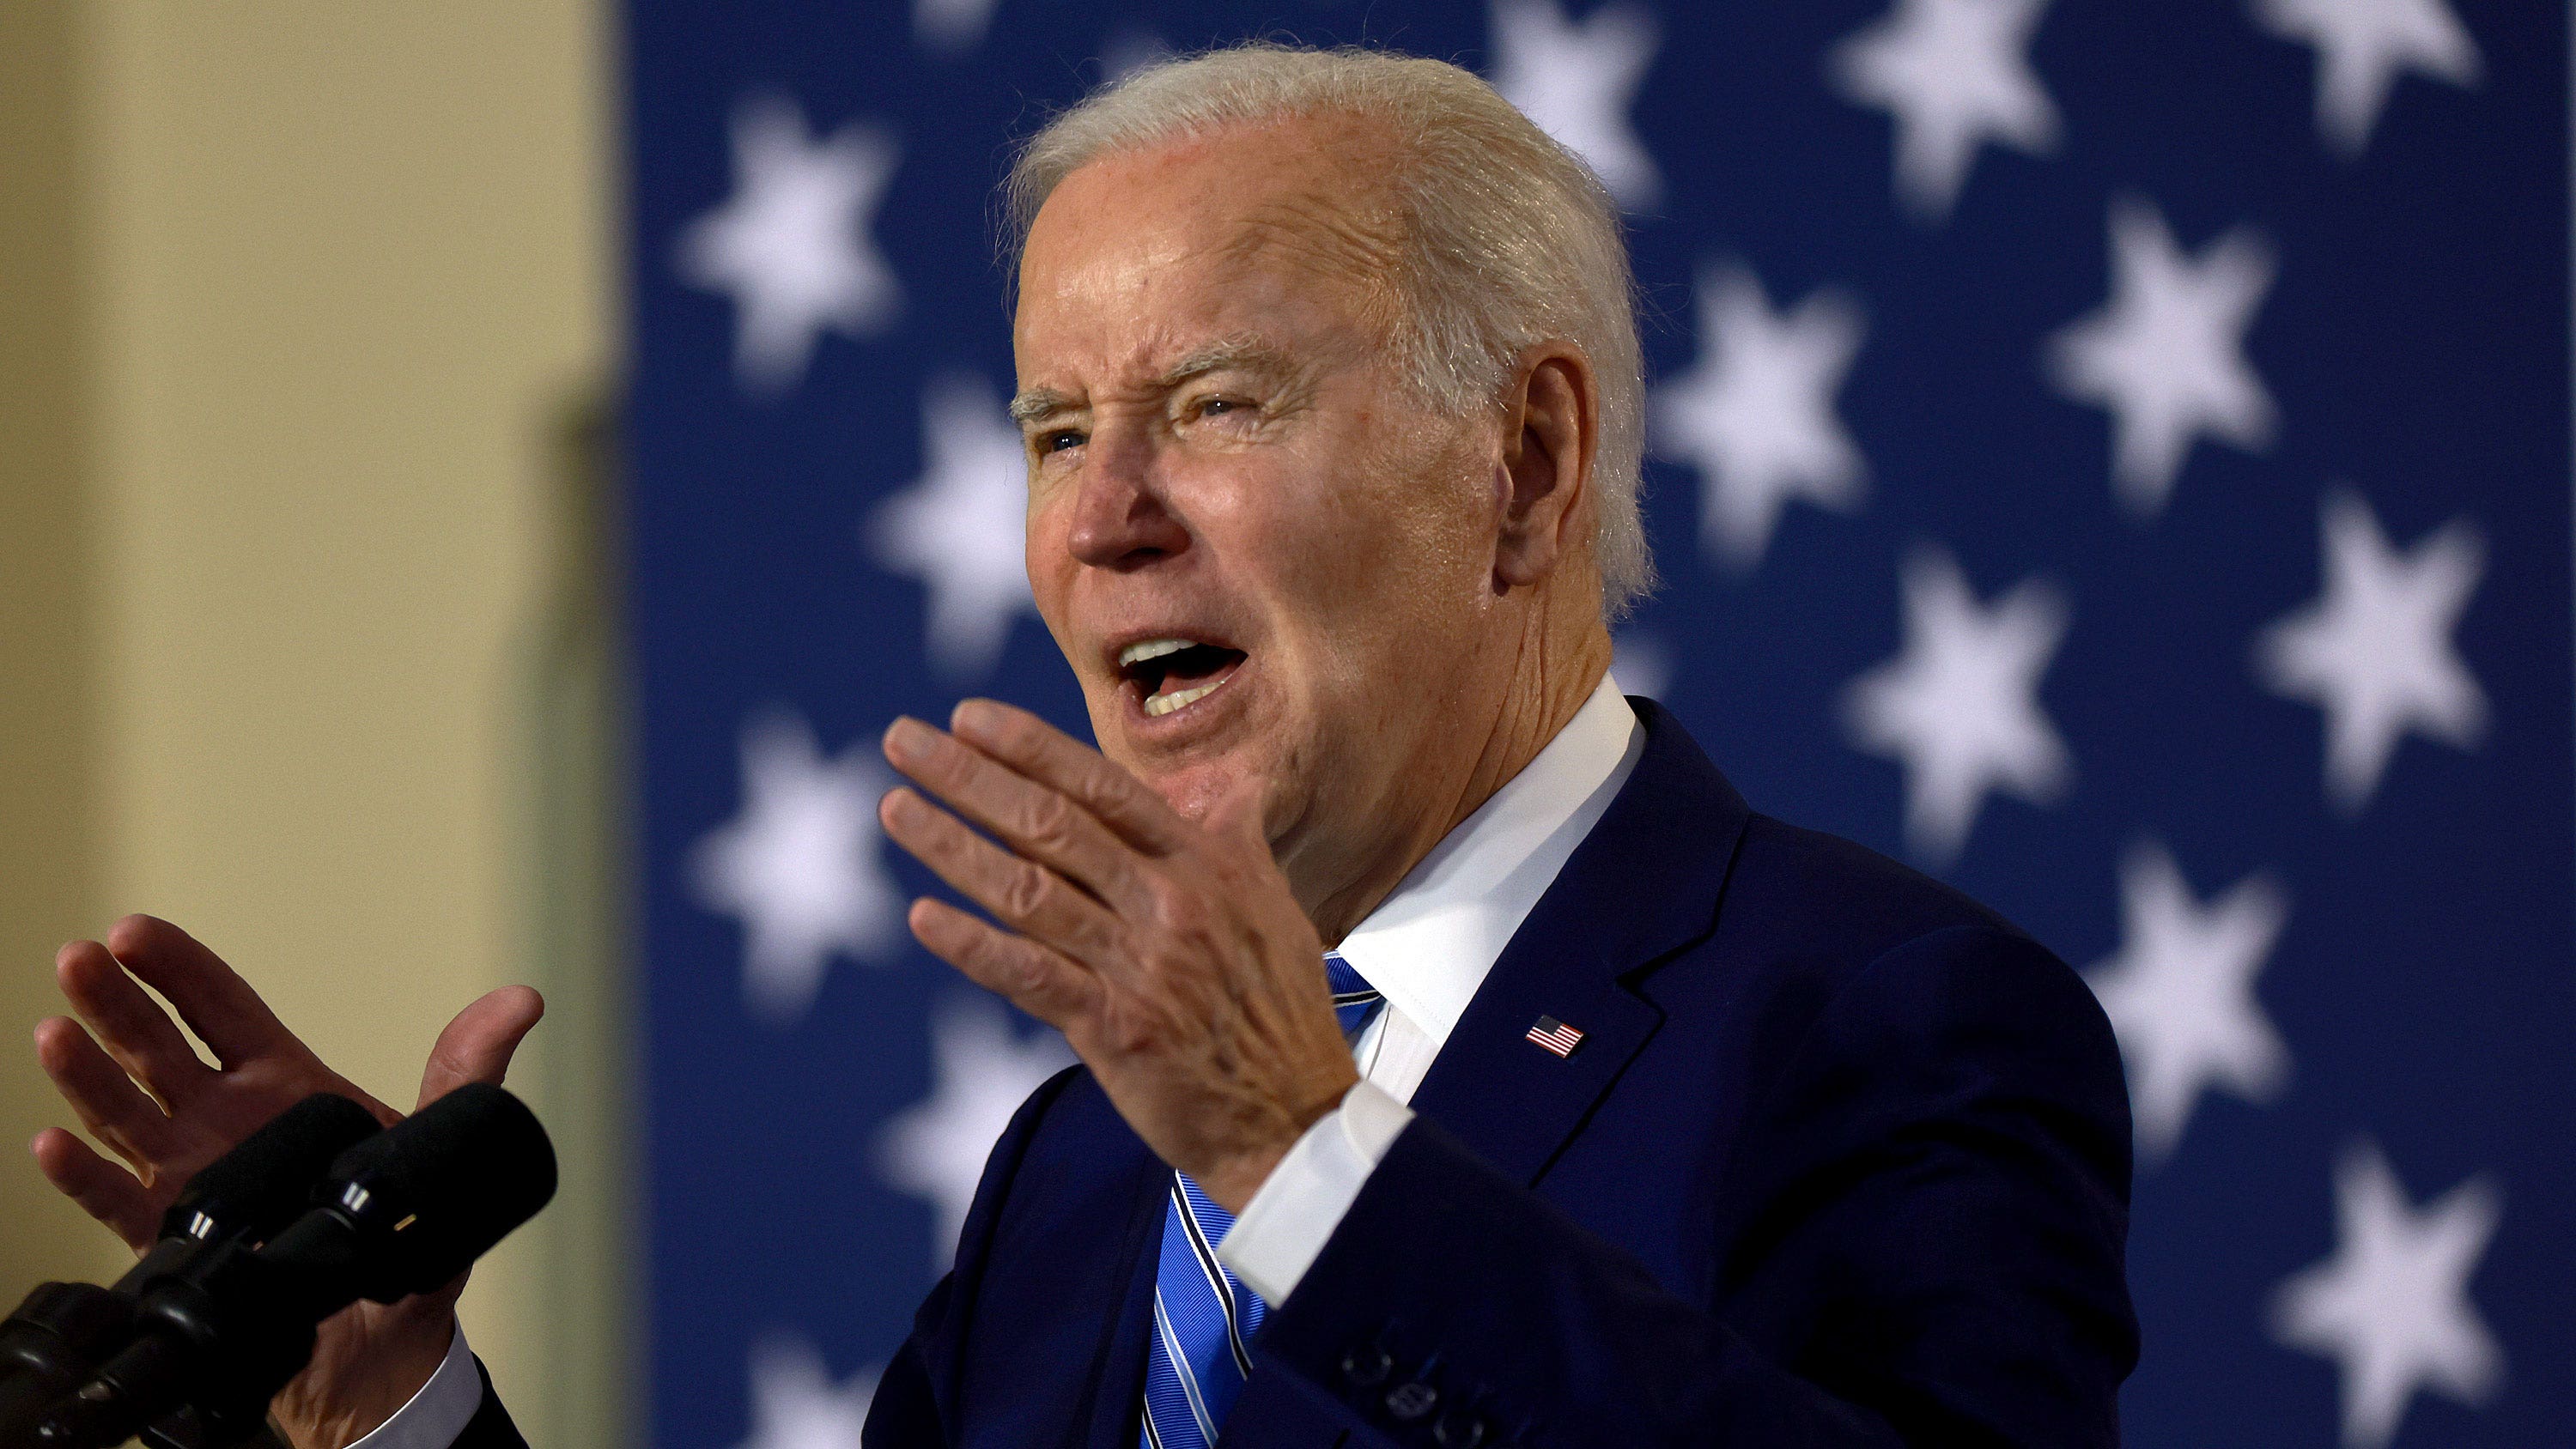 Biden's Twitter account fact-checked for dubious claim about the taxes billionaires pay - Fox News image